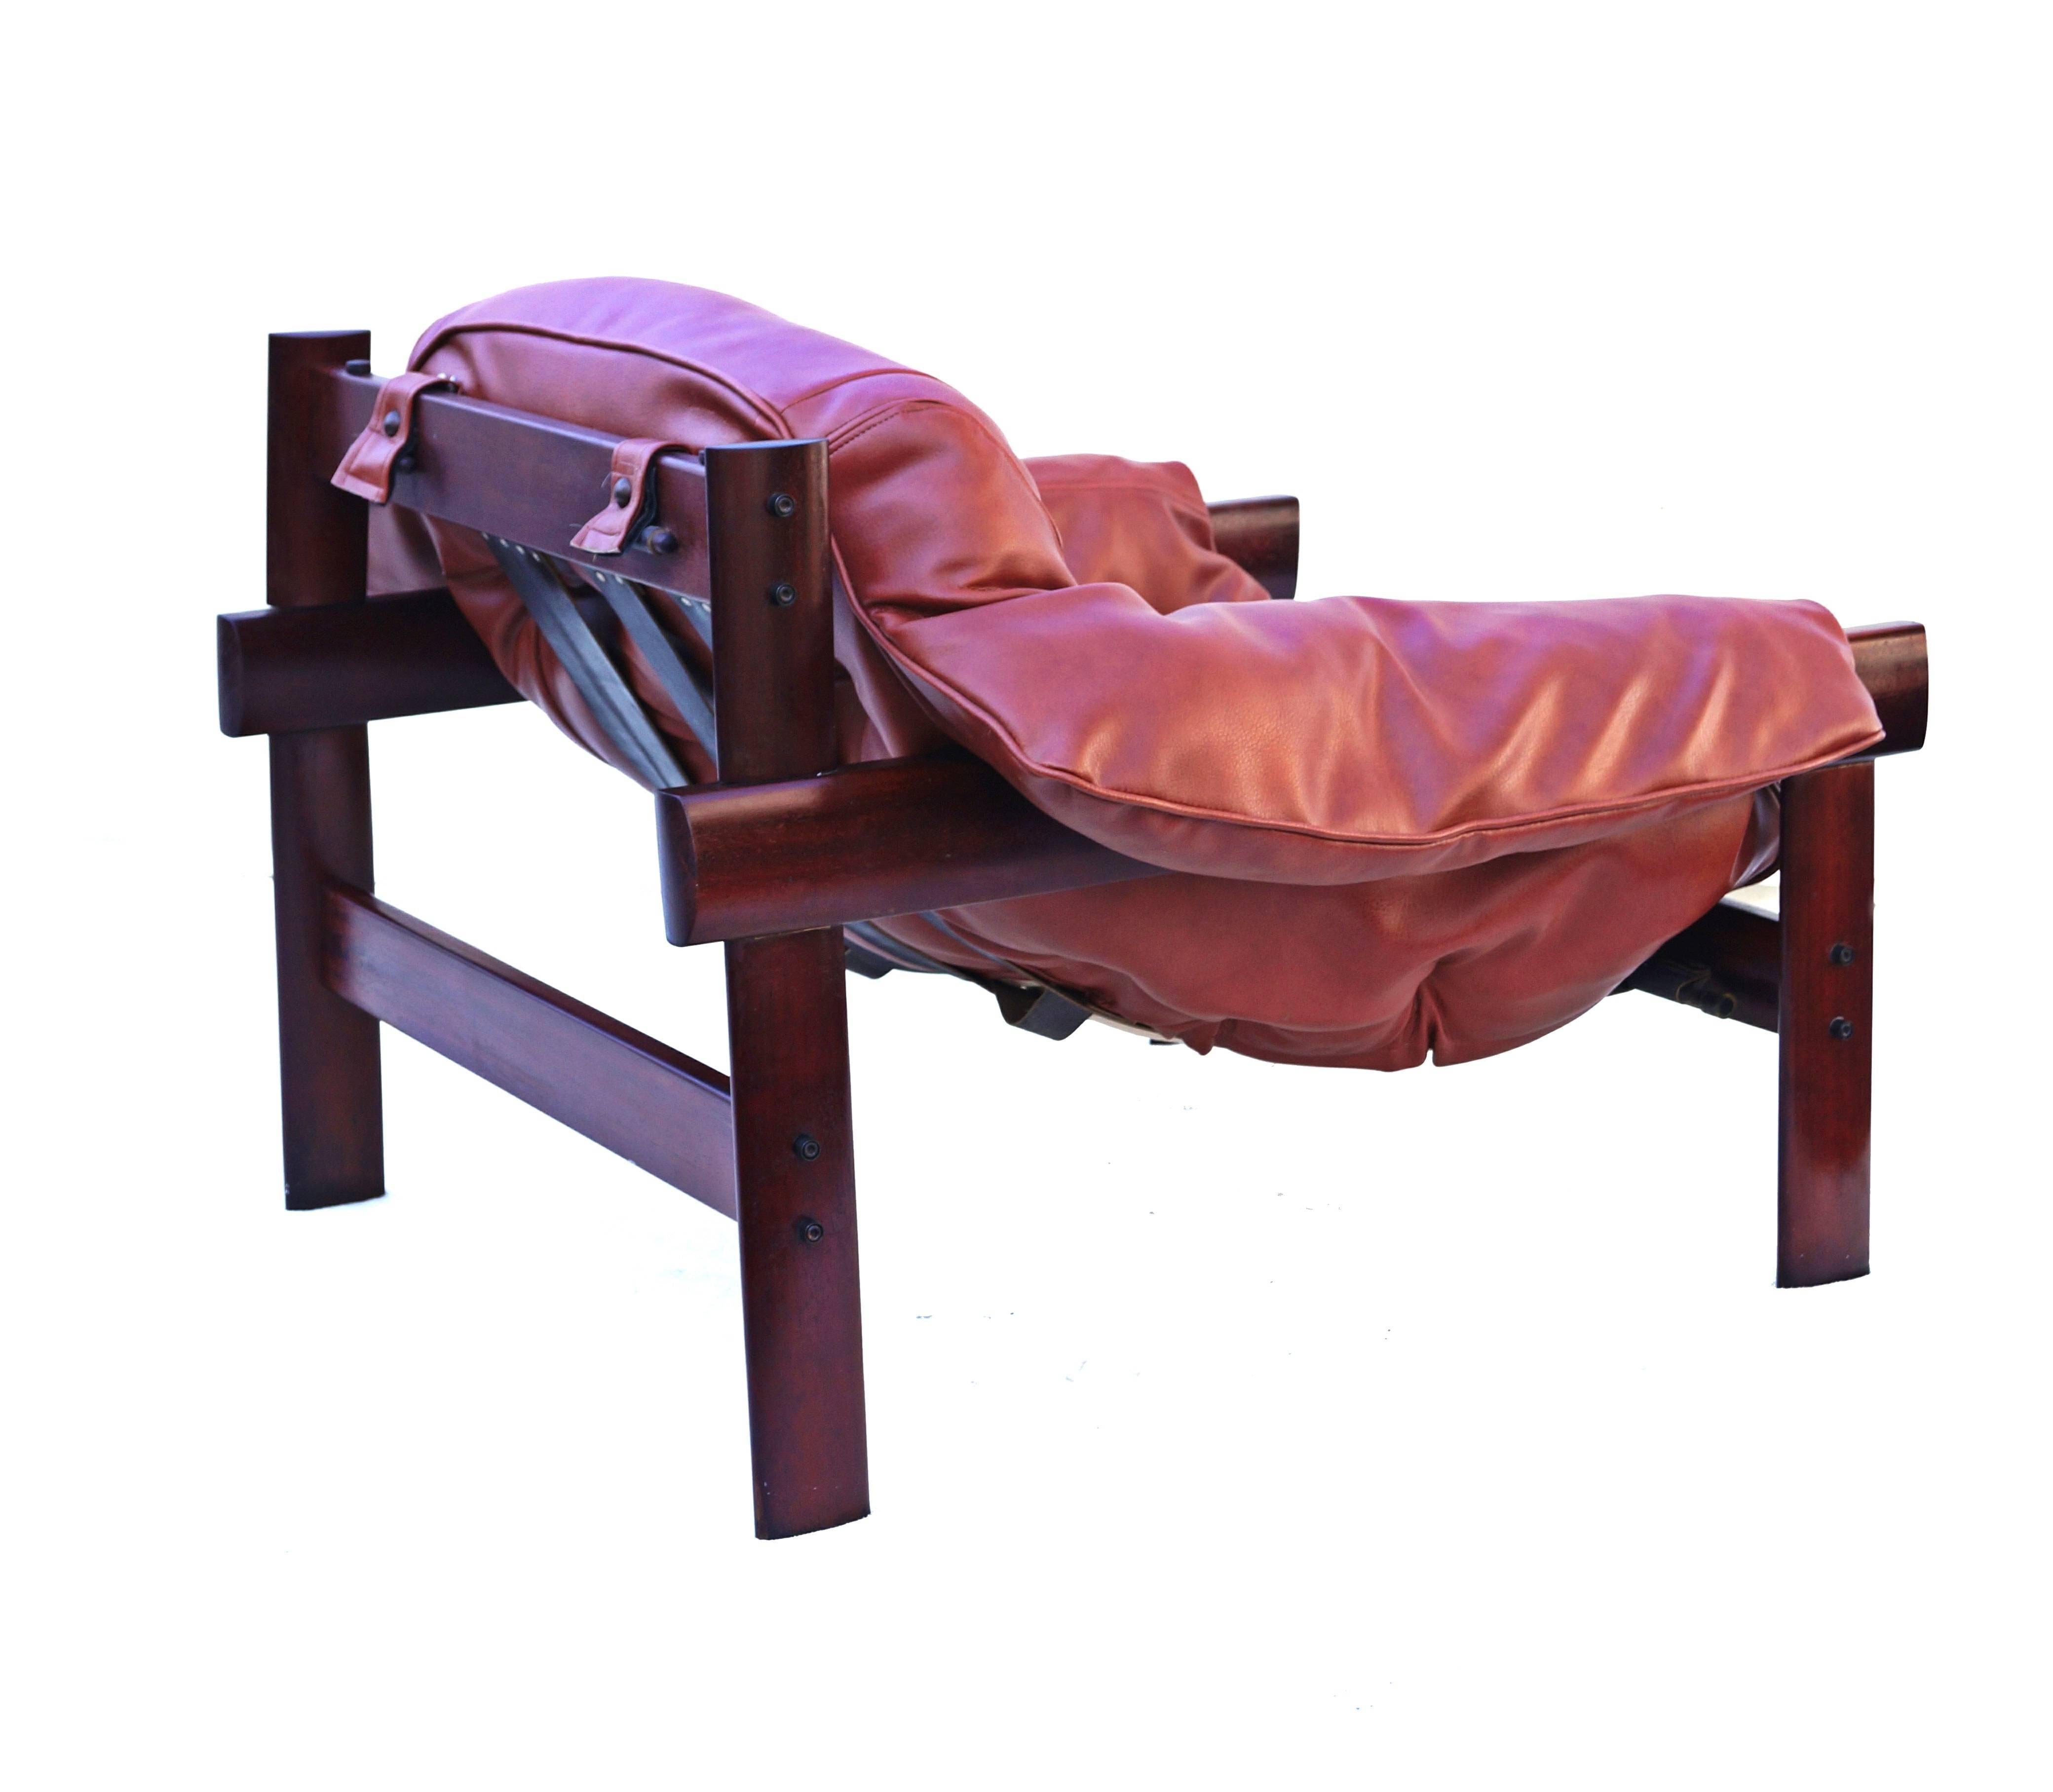 Percival Lafer Brazilian Rosewood Lounge Club Chair 1